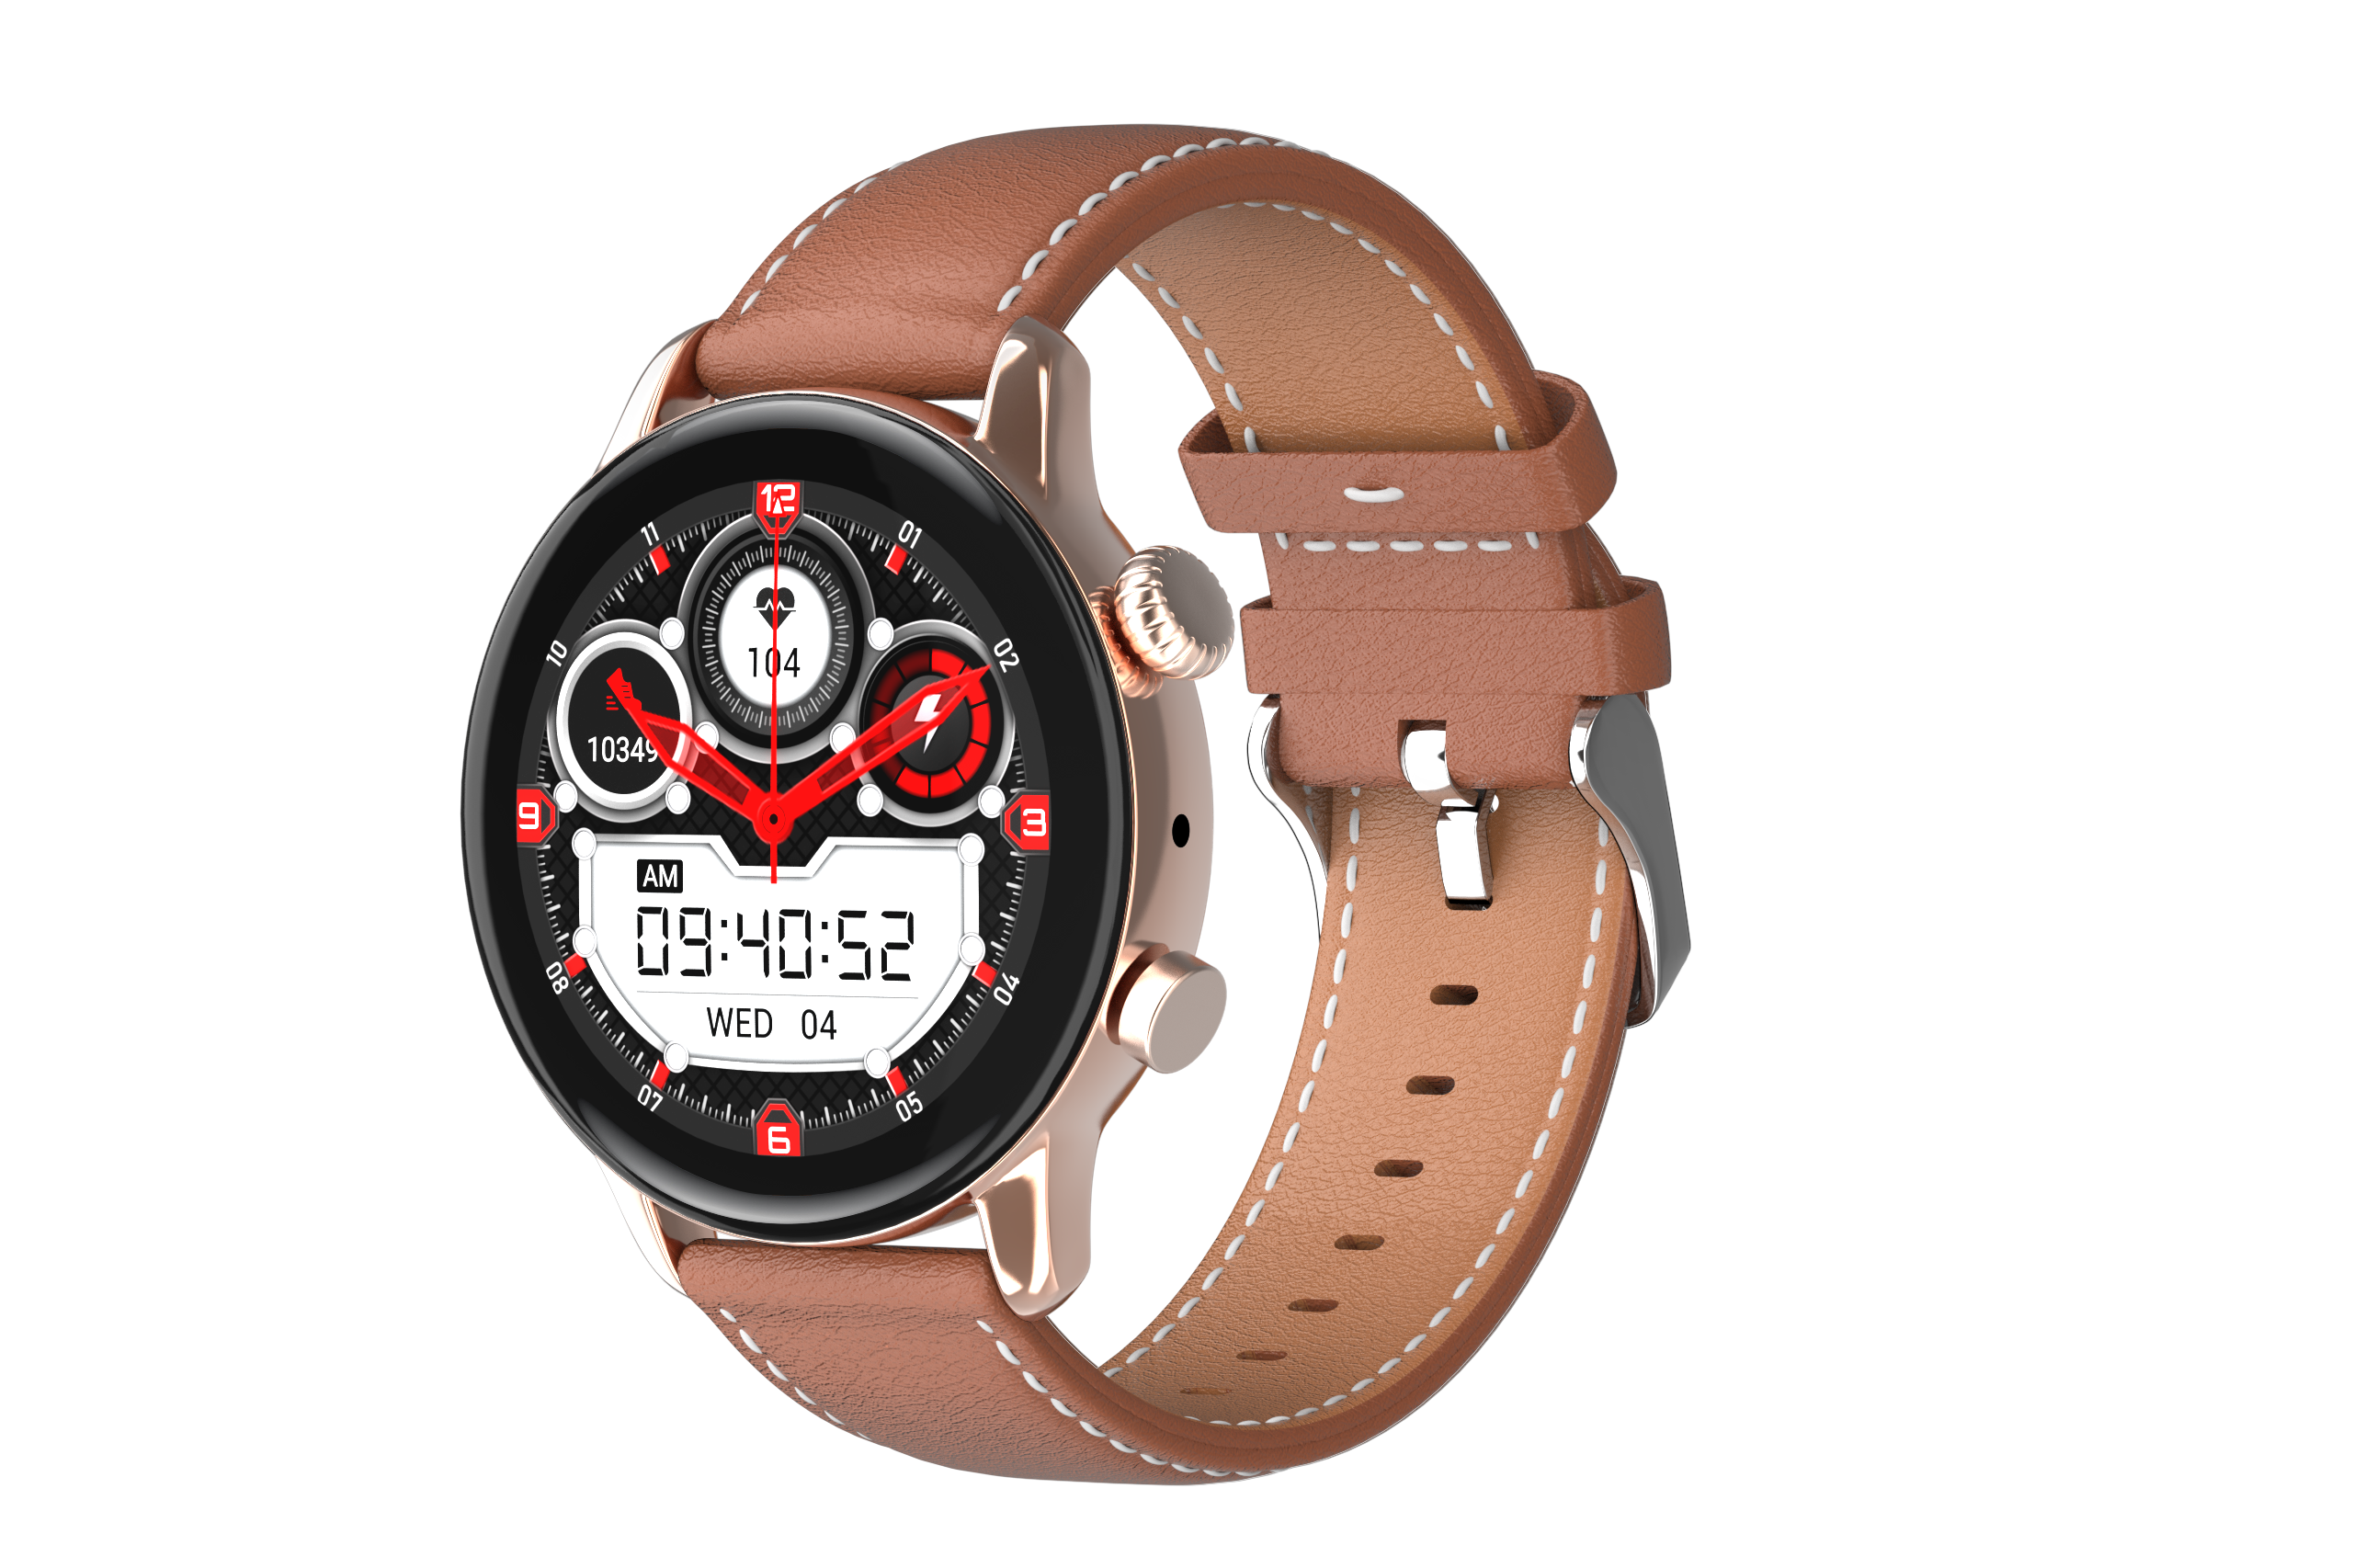 This smartwatch priced below 2500 launched in Flipkart sale, is getting great look with best features - Gizmore launched its new smartphone Gizmore GIZFIT Glow in india,